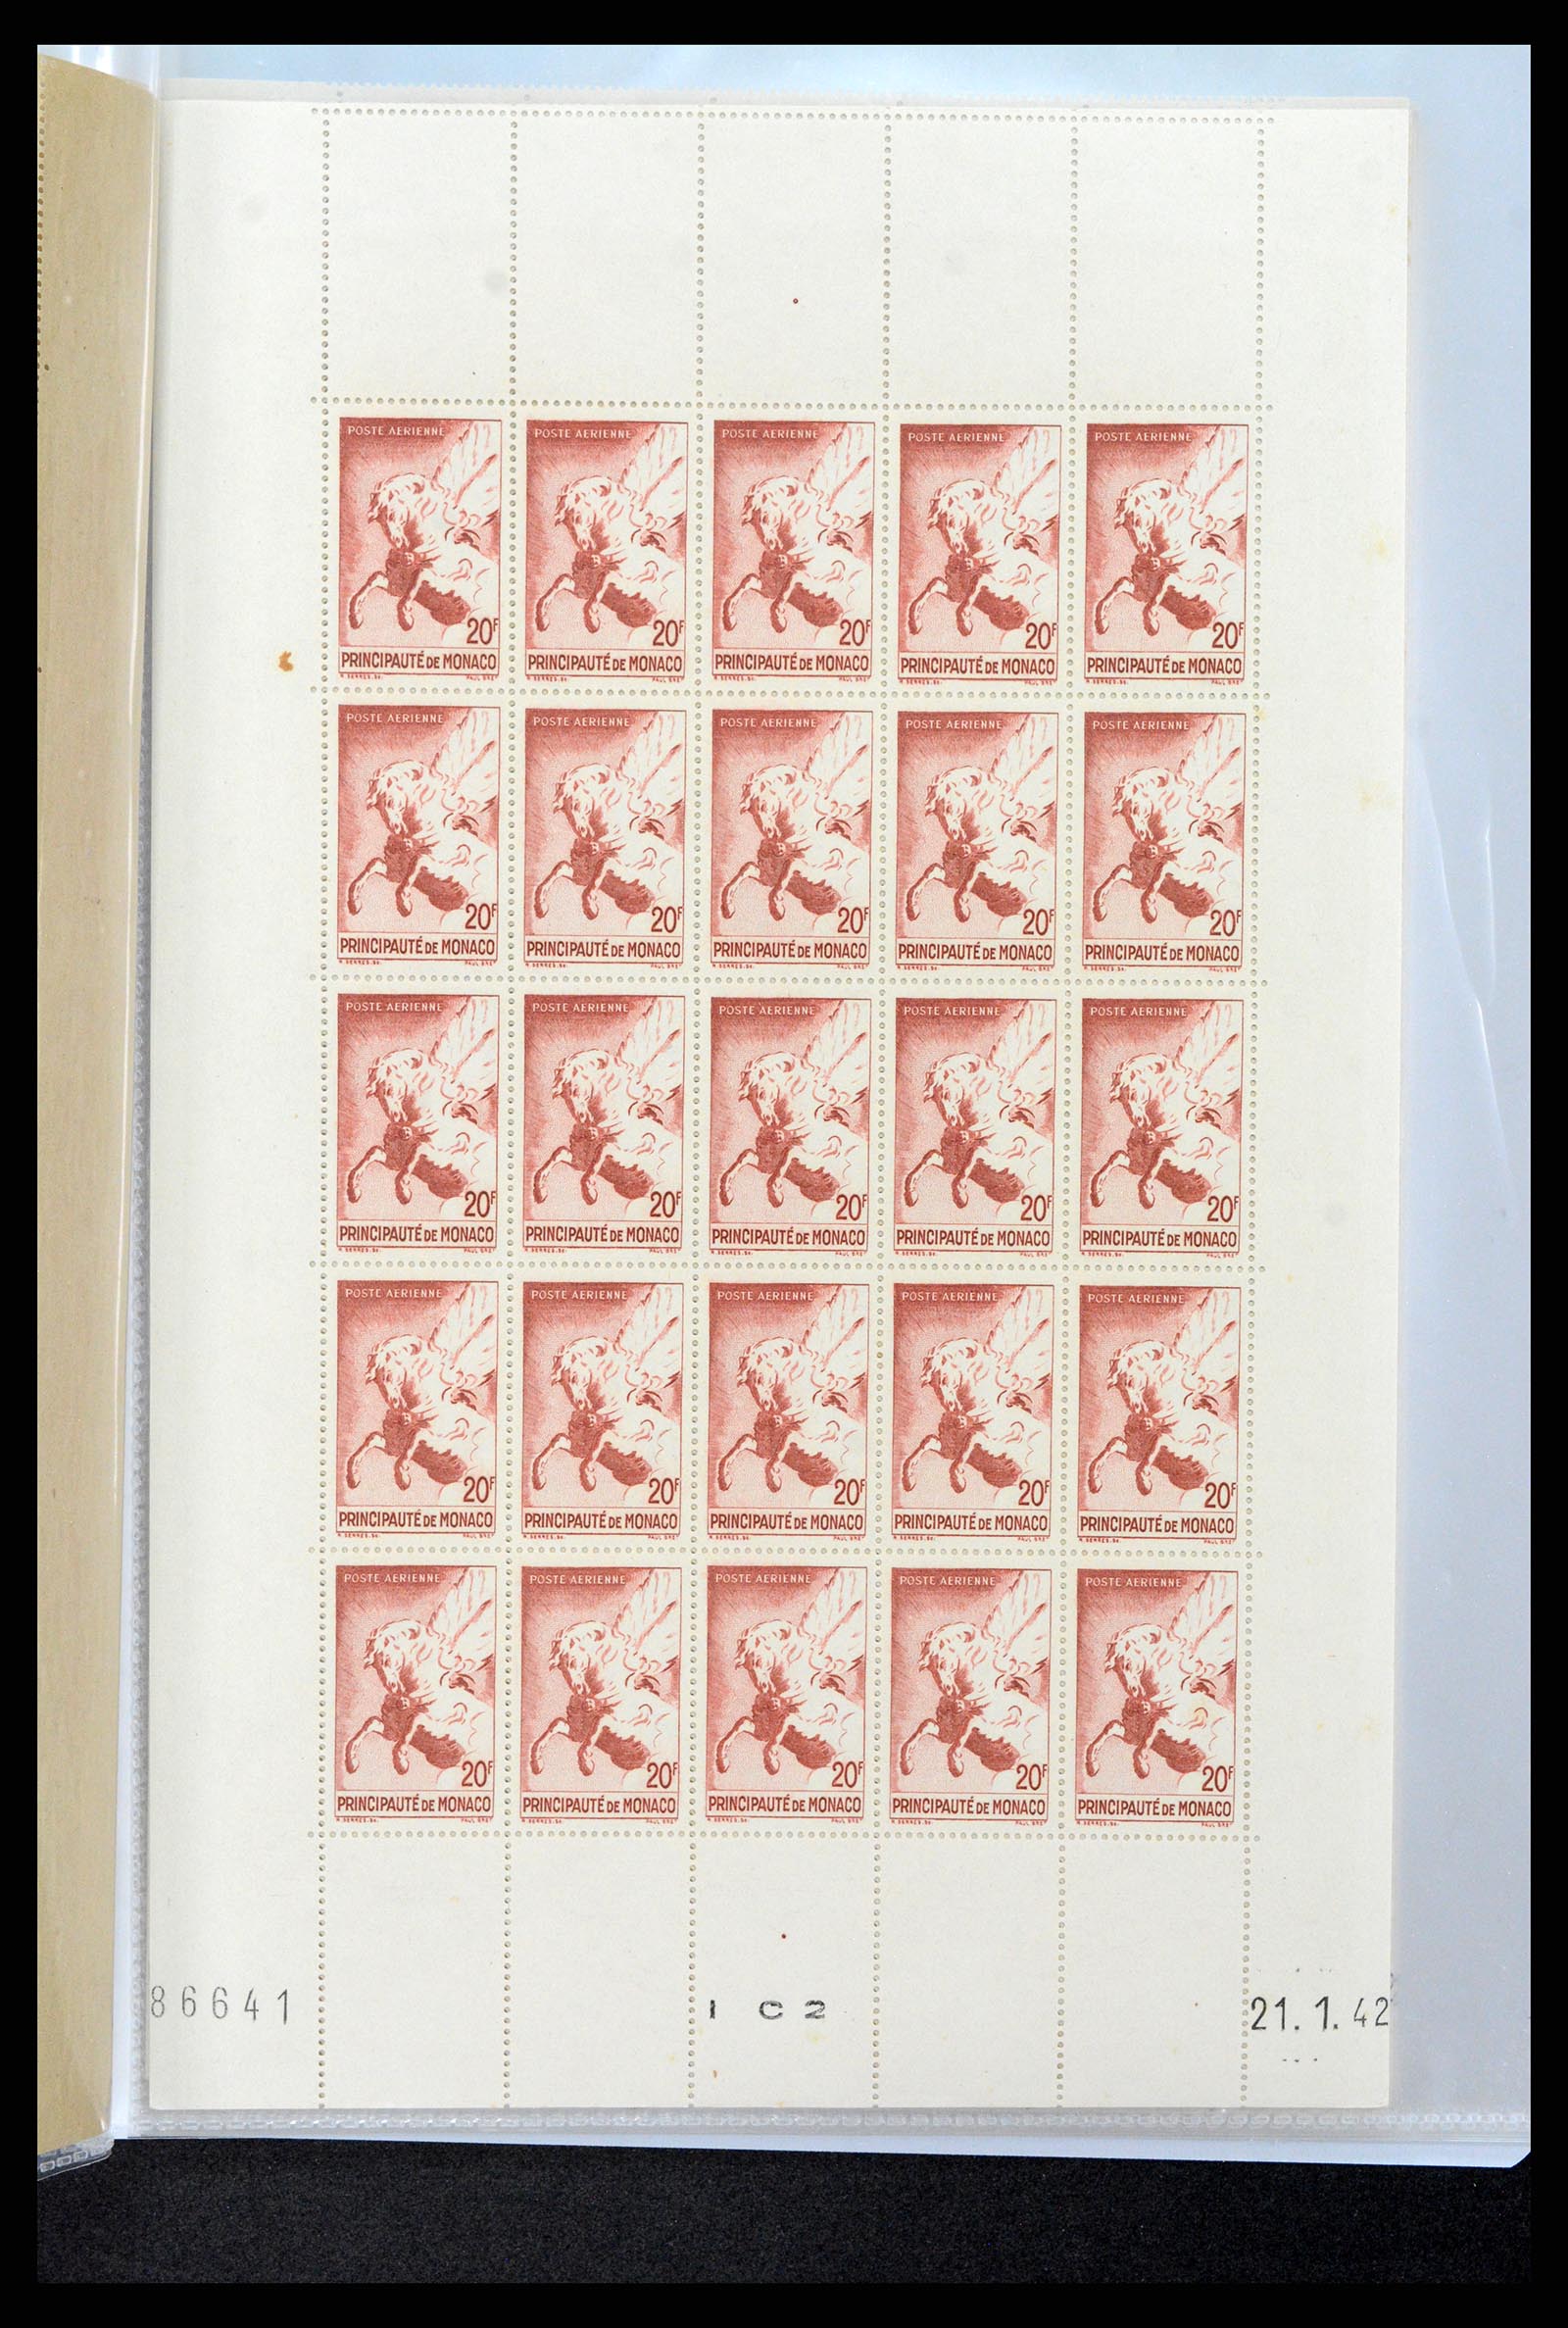 37984 046 - Stamp collection 37984 Monaco better issues 1942-1982.